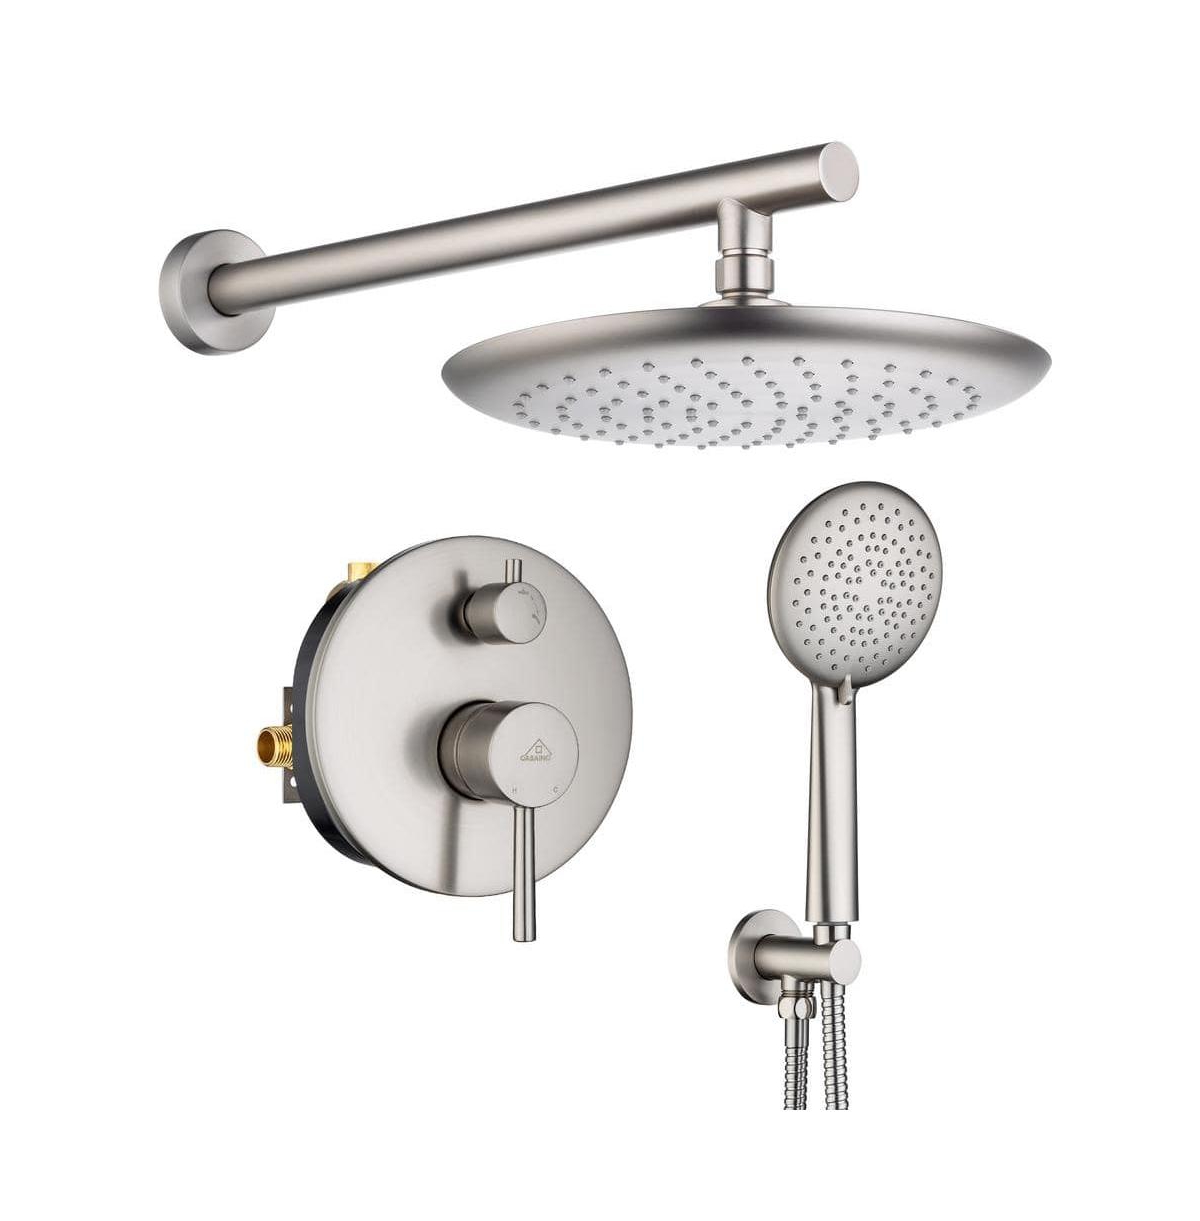 10" Inch Wall Mounted Round Shower System Set with Handheld Spray - Brushed nickel